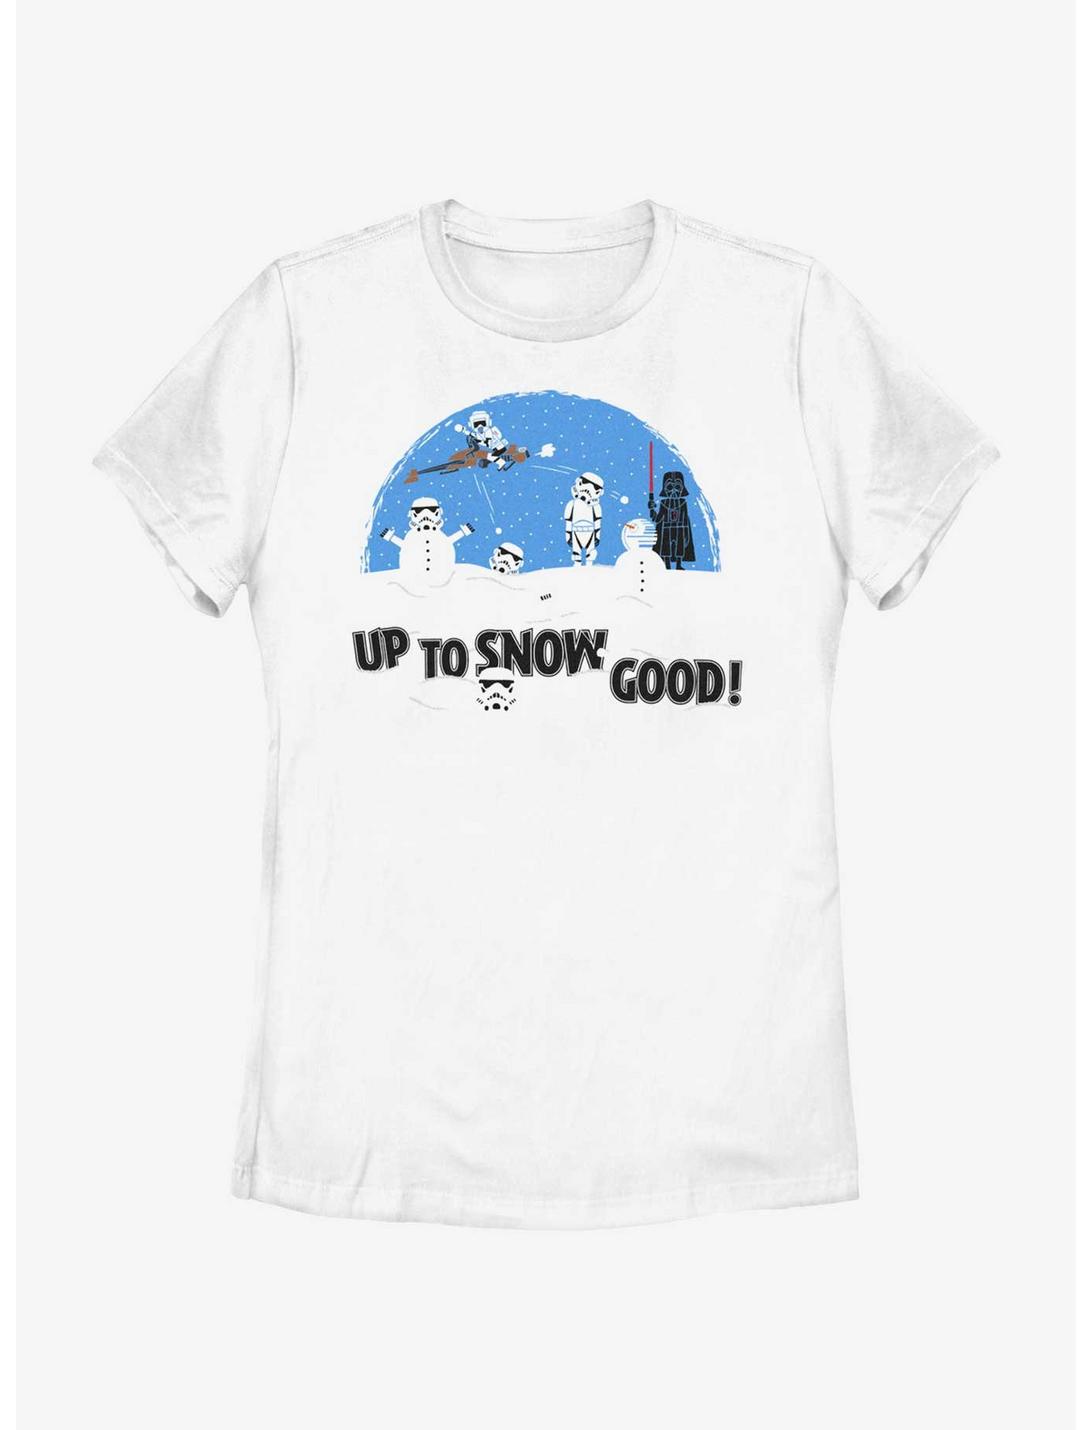 Star Wars Up To Snow Good Womens T-Shirt, WHITE, hi-res